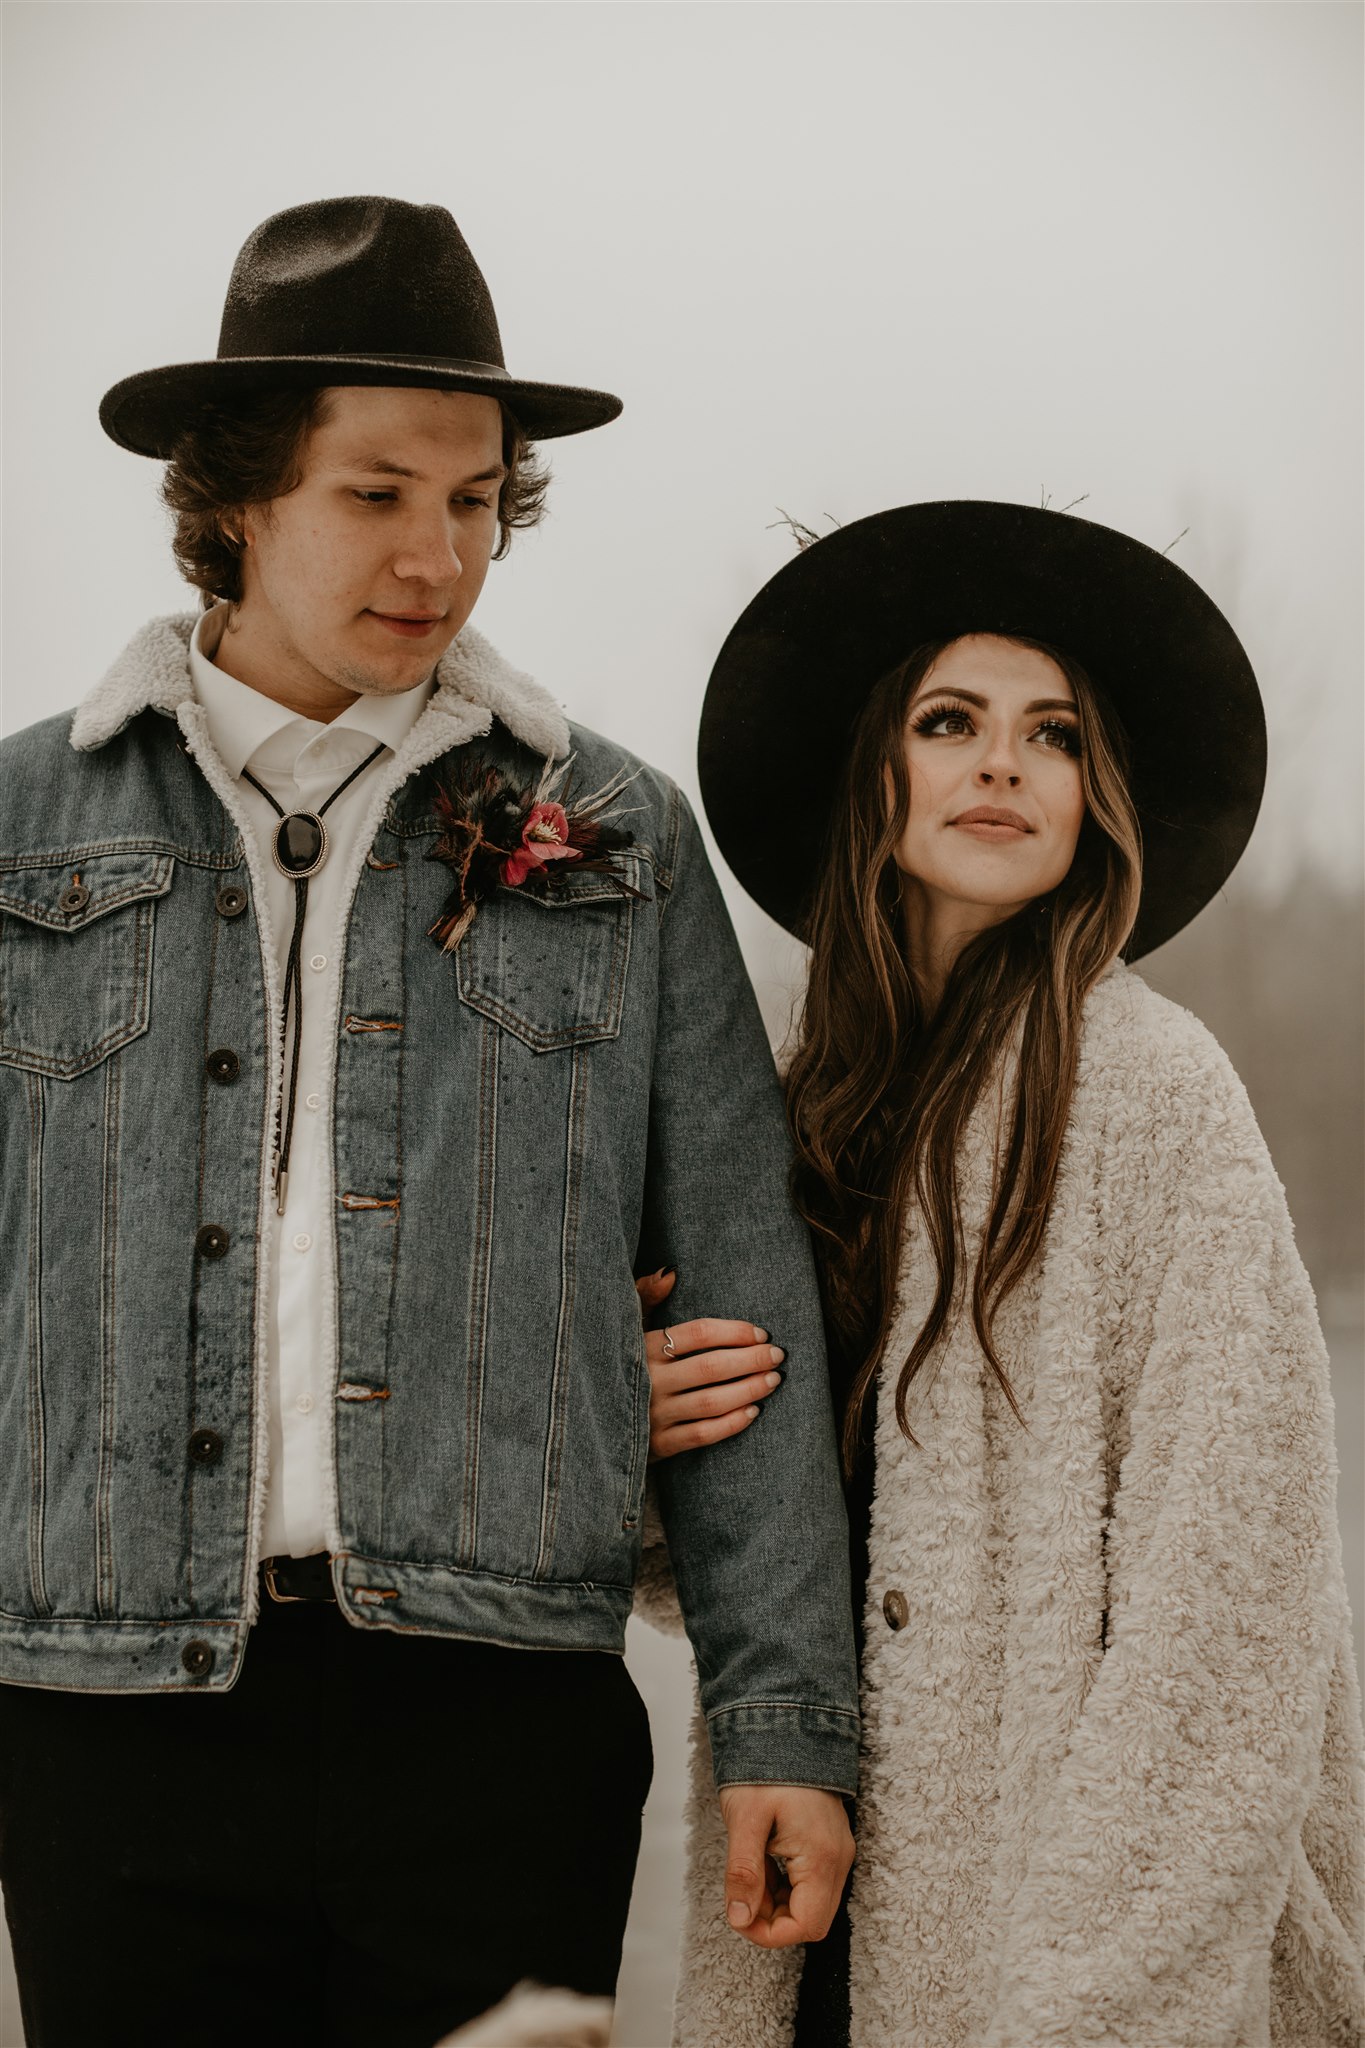 Boho chic bride in furry jacket and groom in jean jacket on snowy river bank